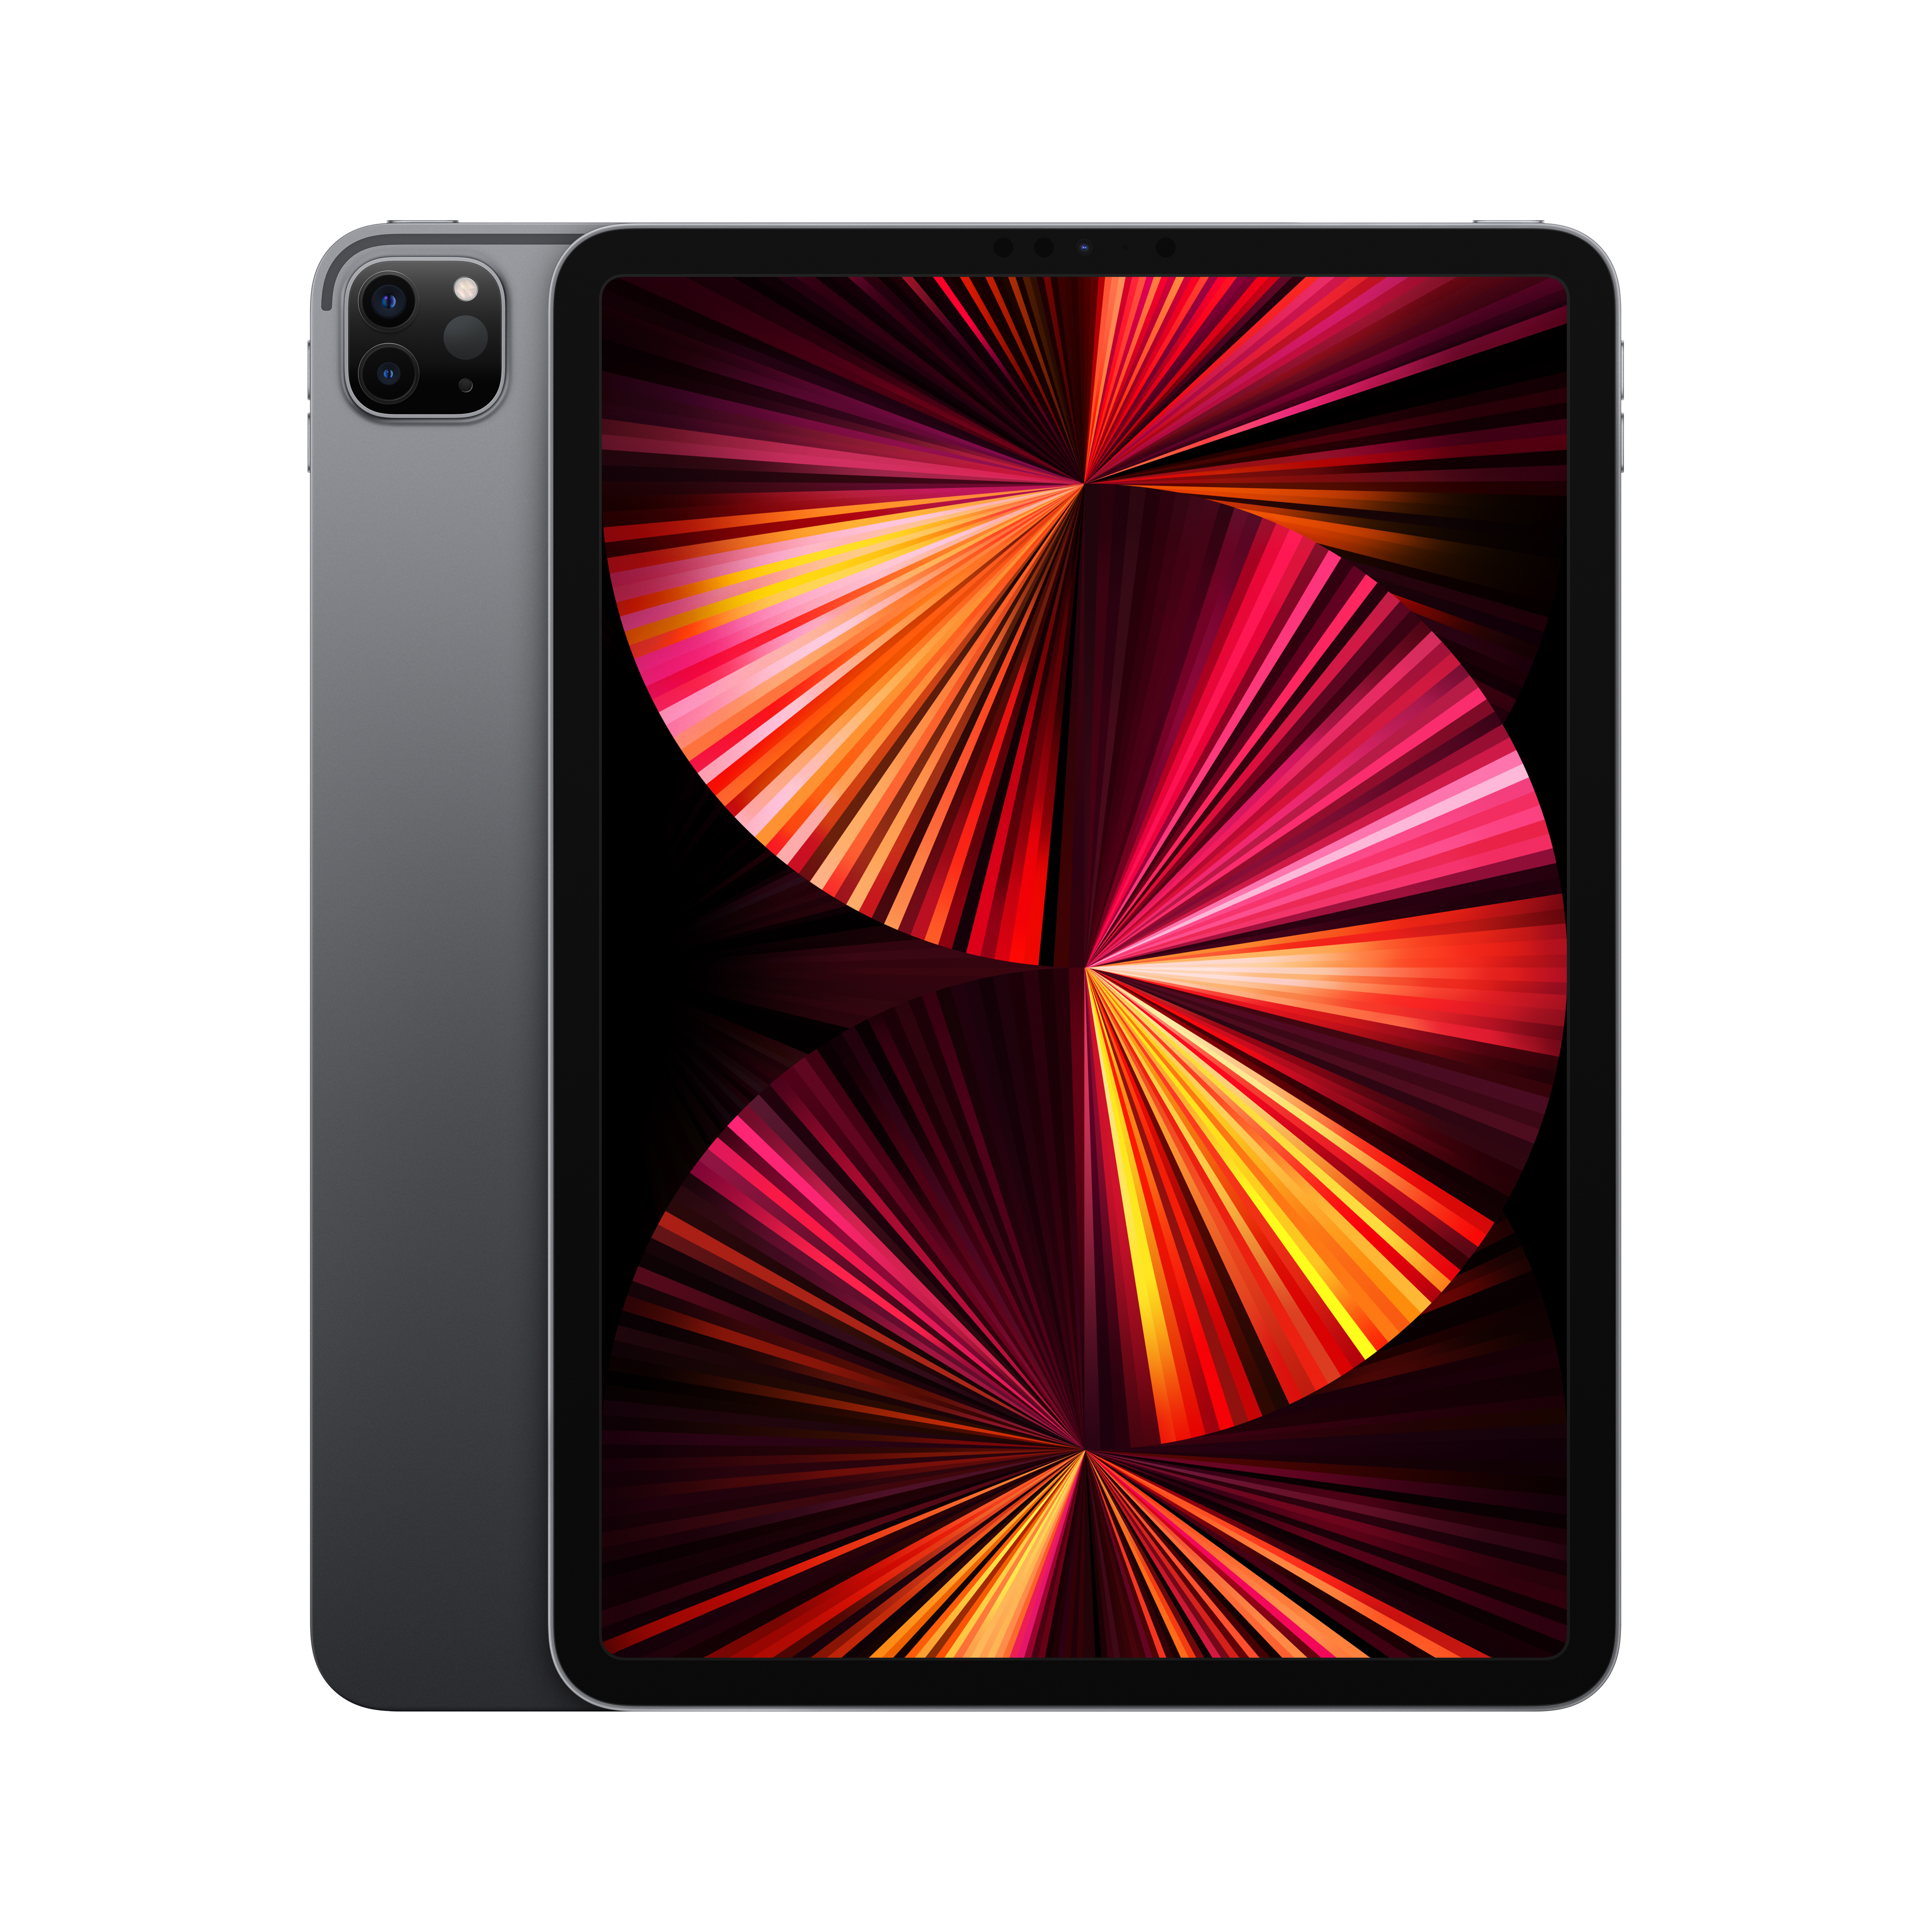 2021 Apple 11-inch iPad Pro Wi-Fi + Cellular 512GB - Space Gray (3rd Generation) - image 1 of 9